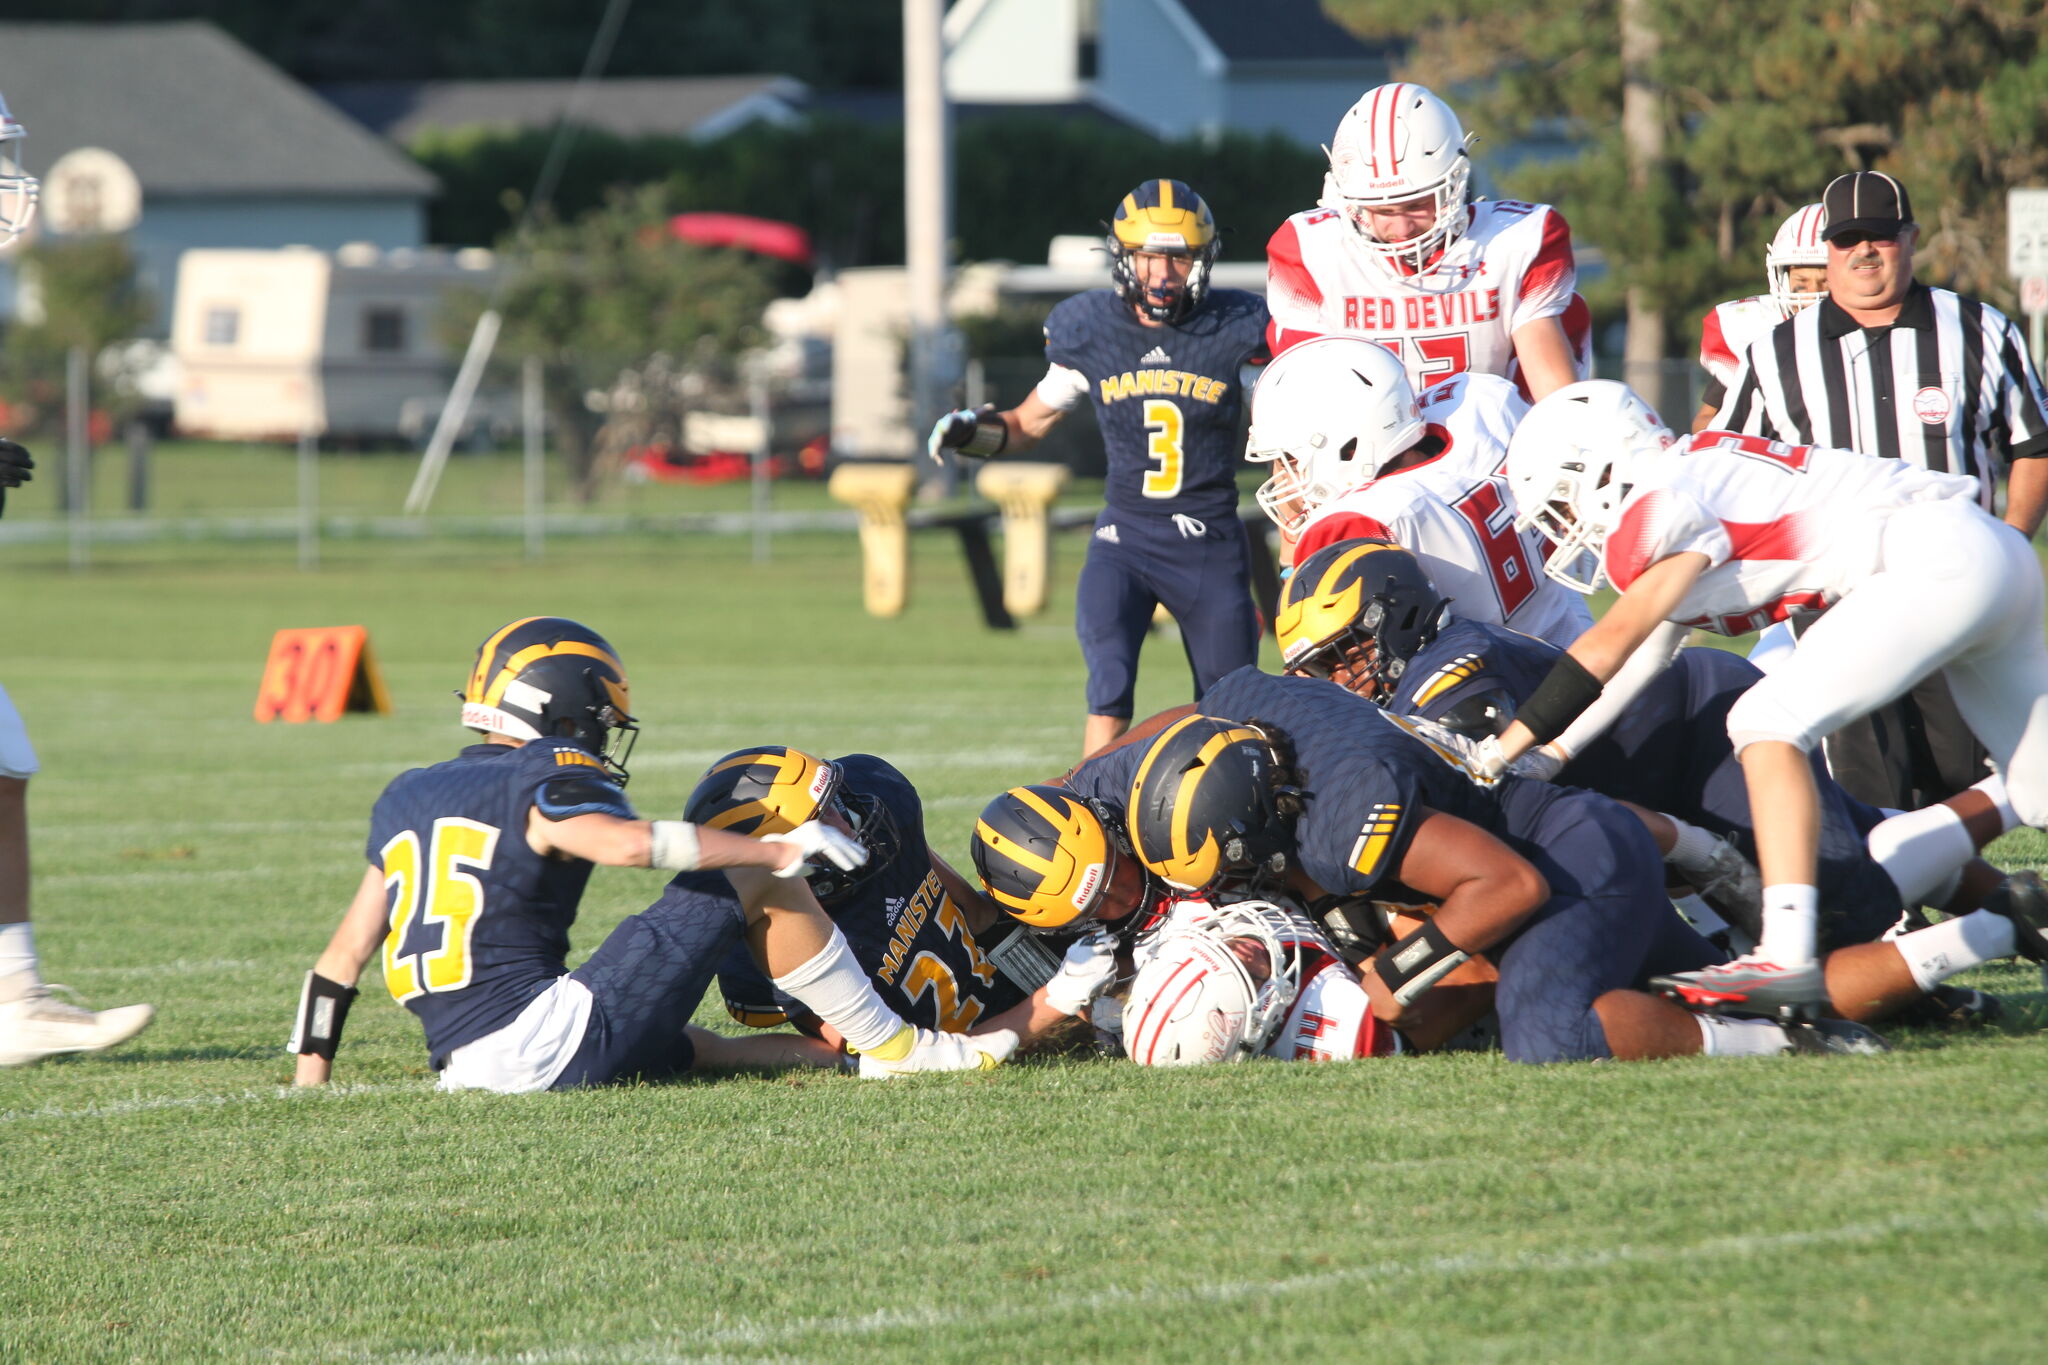 Manistee football’s defense to play aggressive, fast